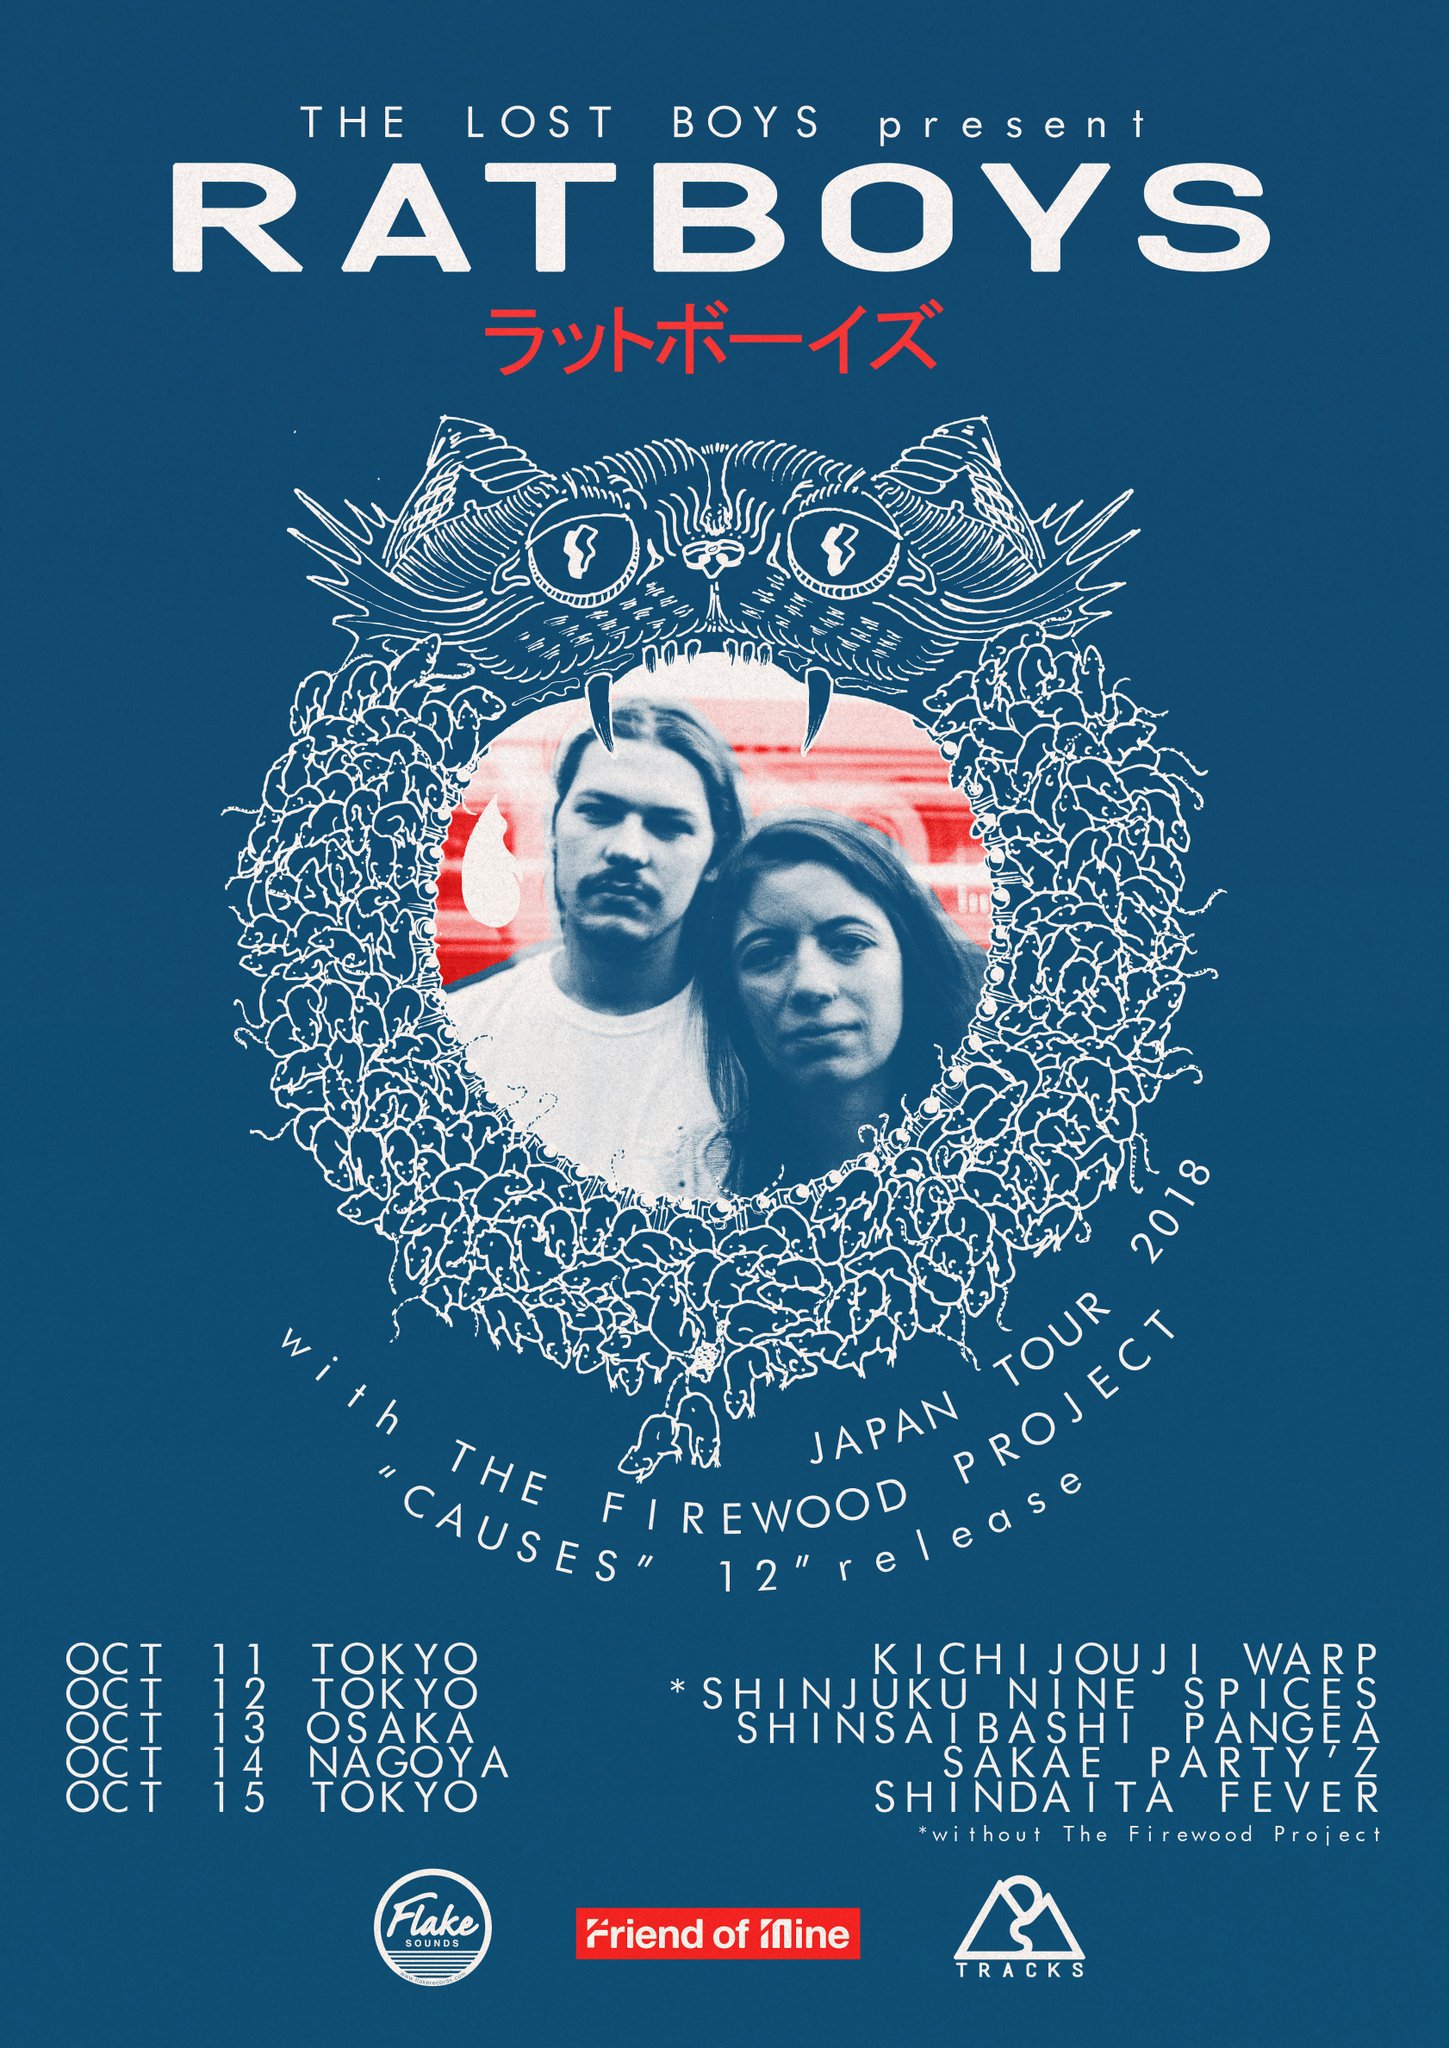 【The Lost Boys Present. Ratboys Japan Tour 2018 / The Firewood Project Causes 12" Release Tour】